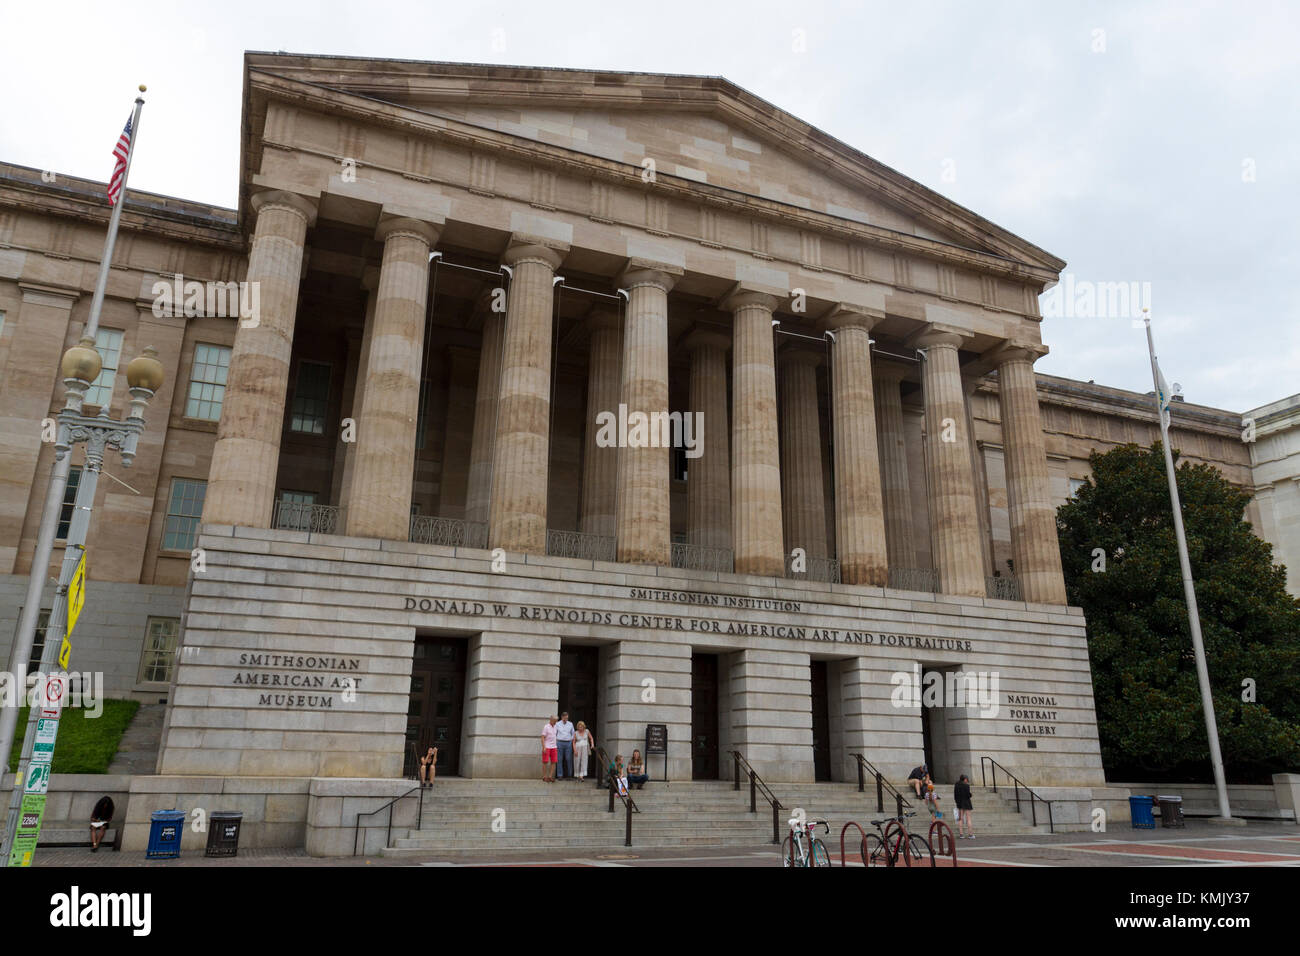 The National Portrait Gallery (Donald W. Reynolds Center for American Art & Portraiture) in Washington DC, United States. Stock Photo